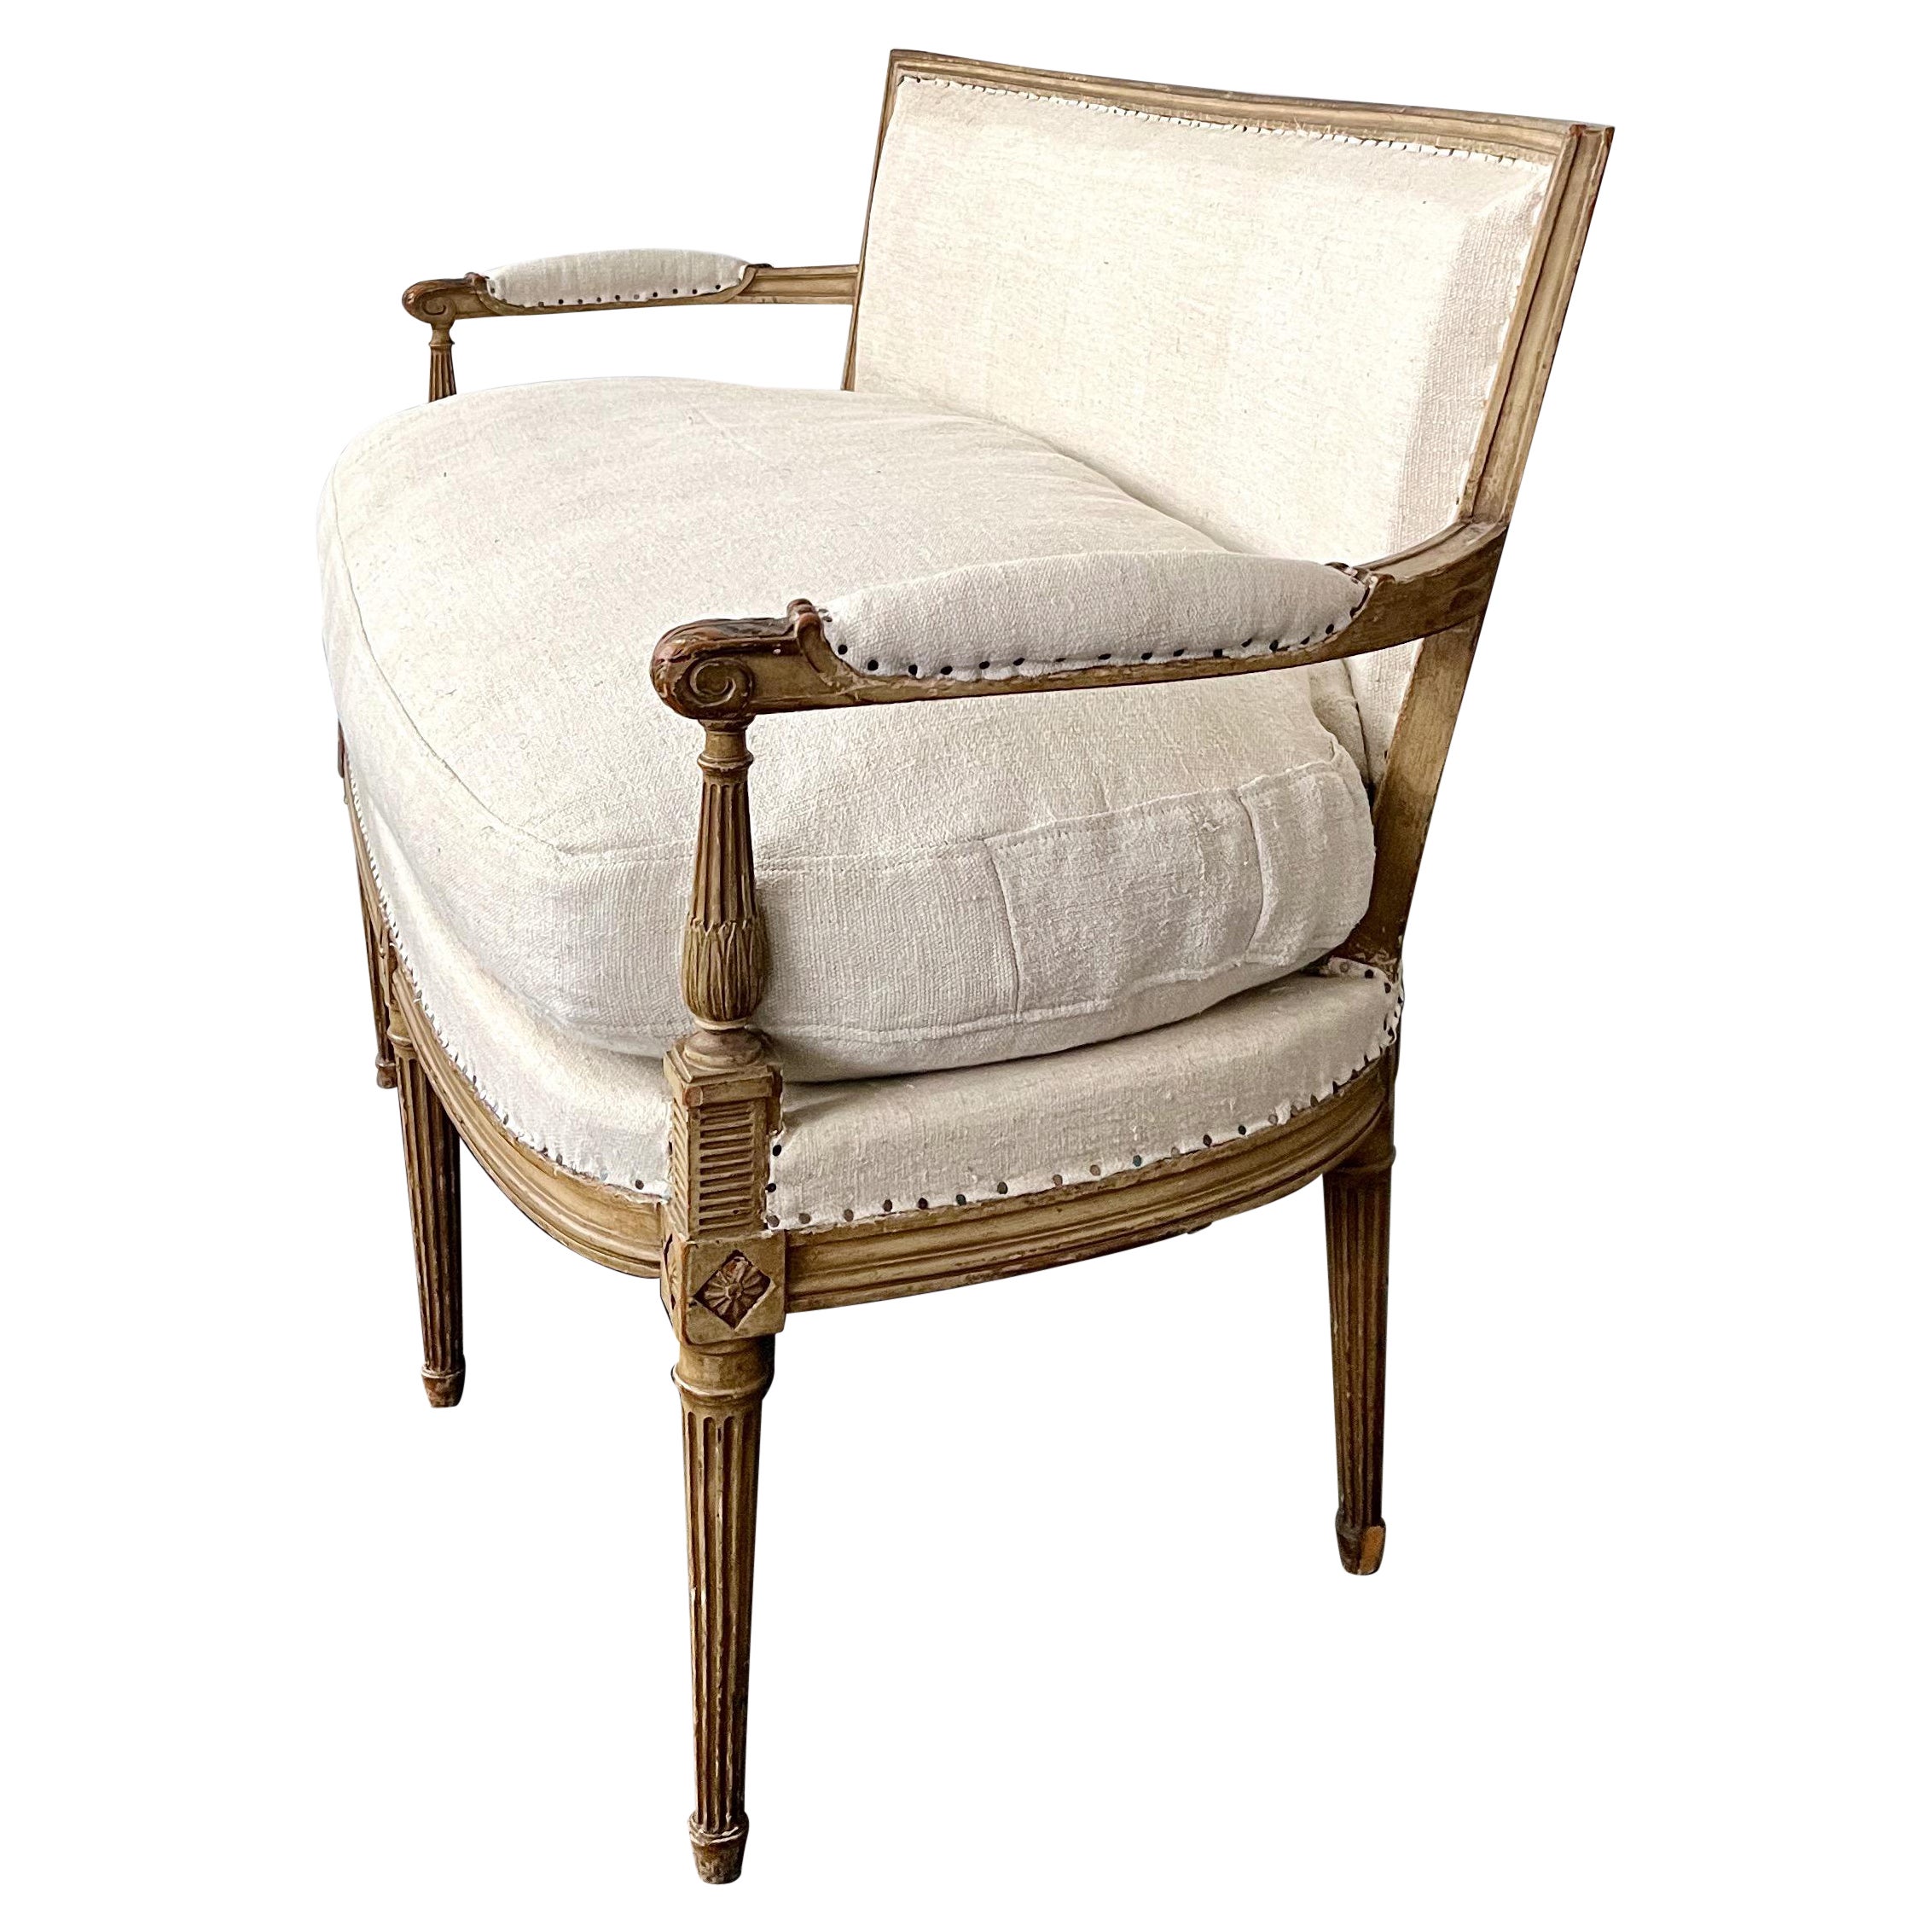 19th century French Louis XVI Style Settee For Sale